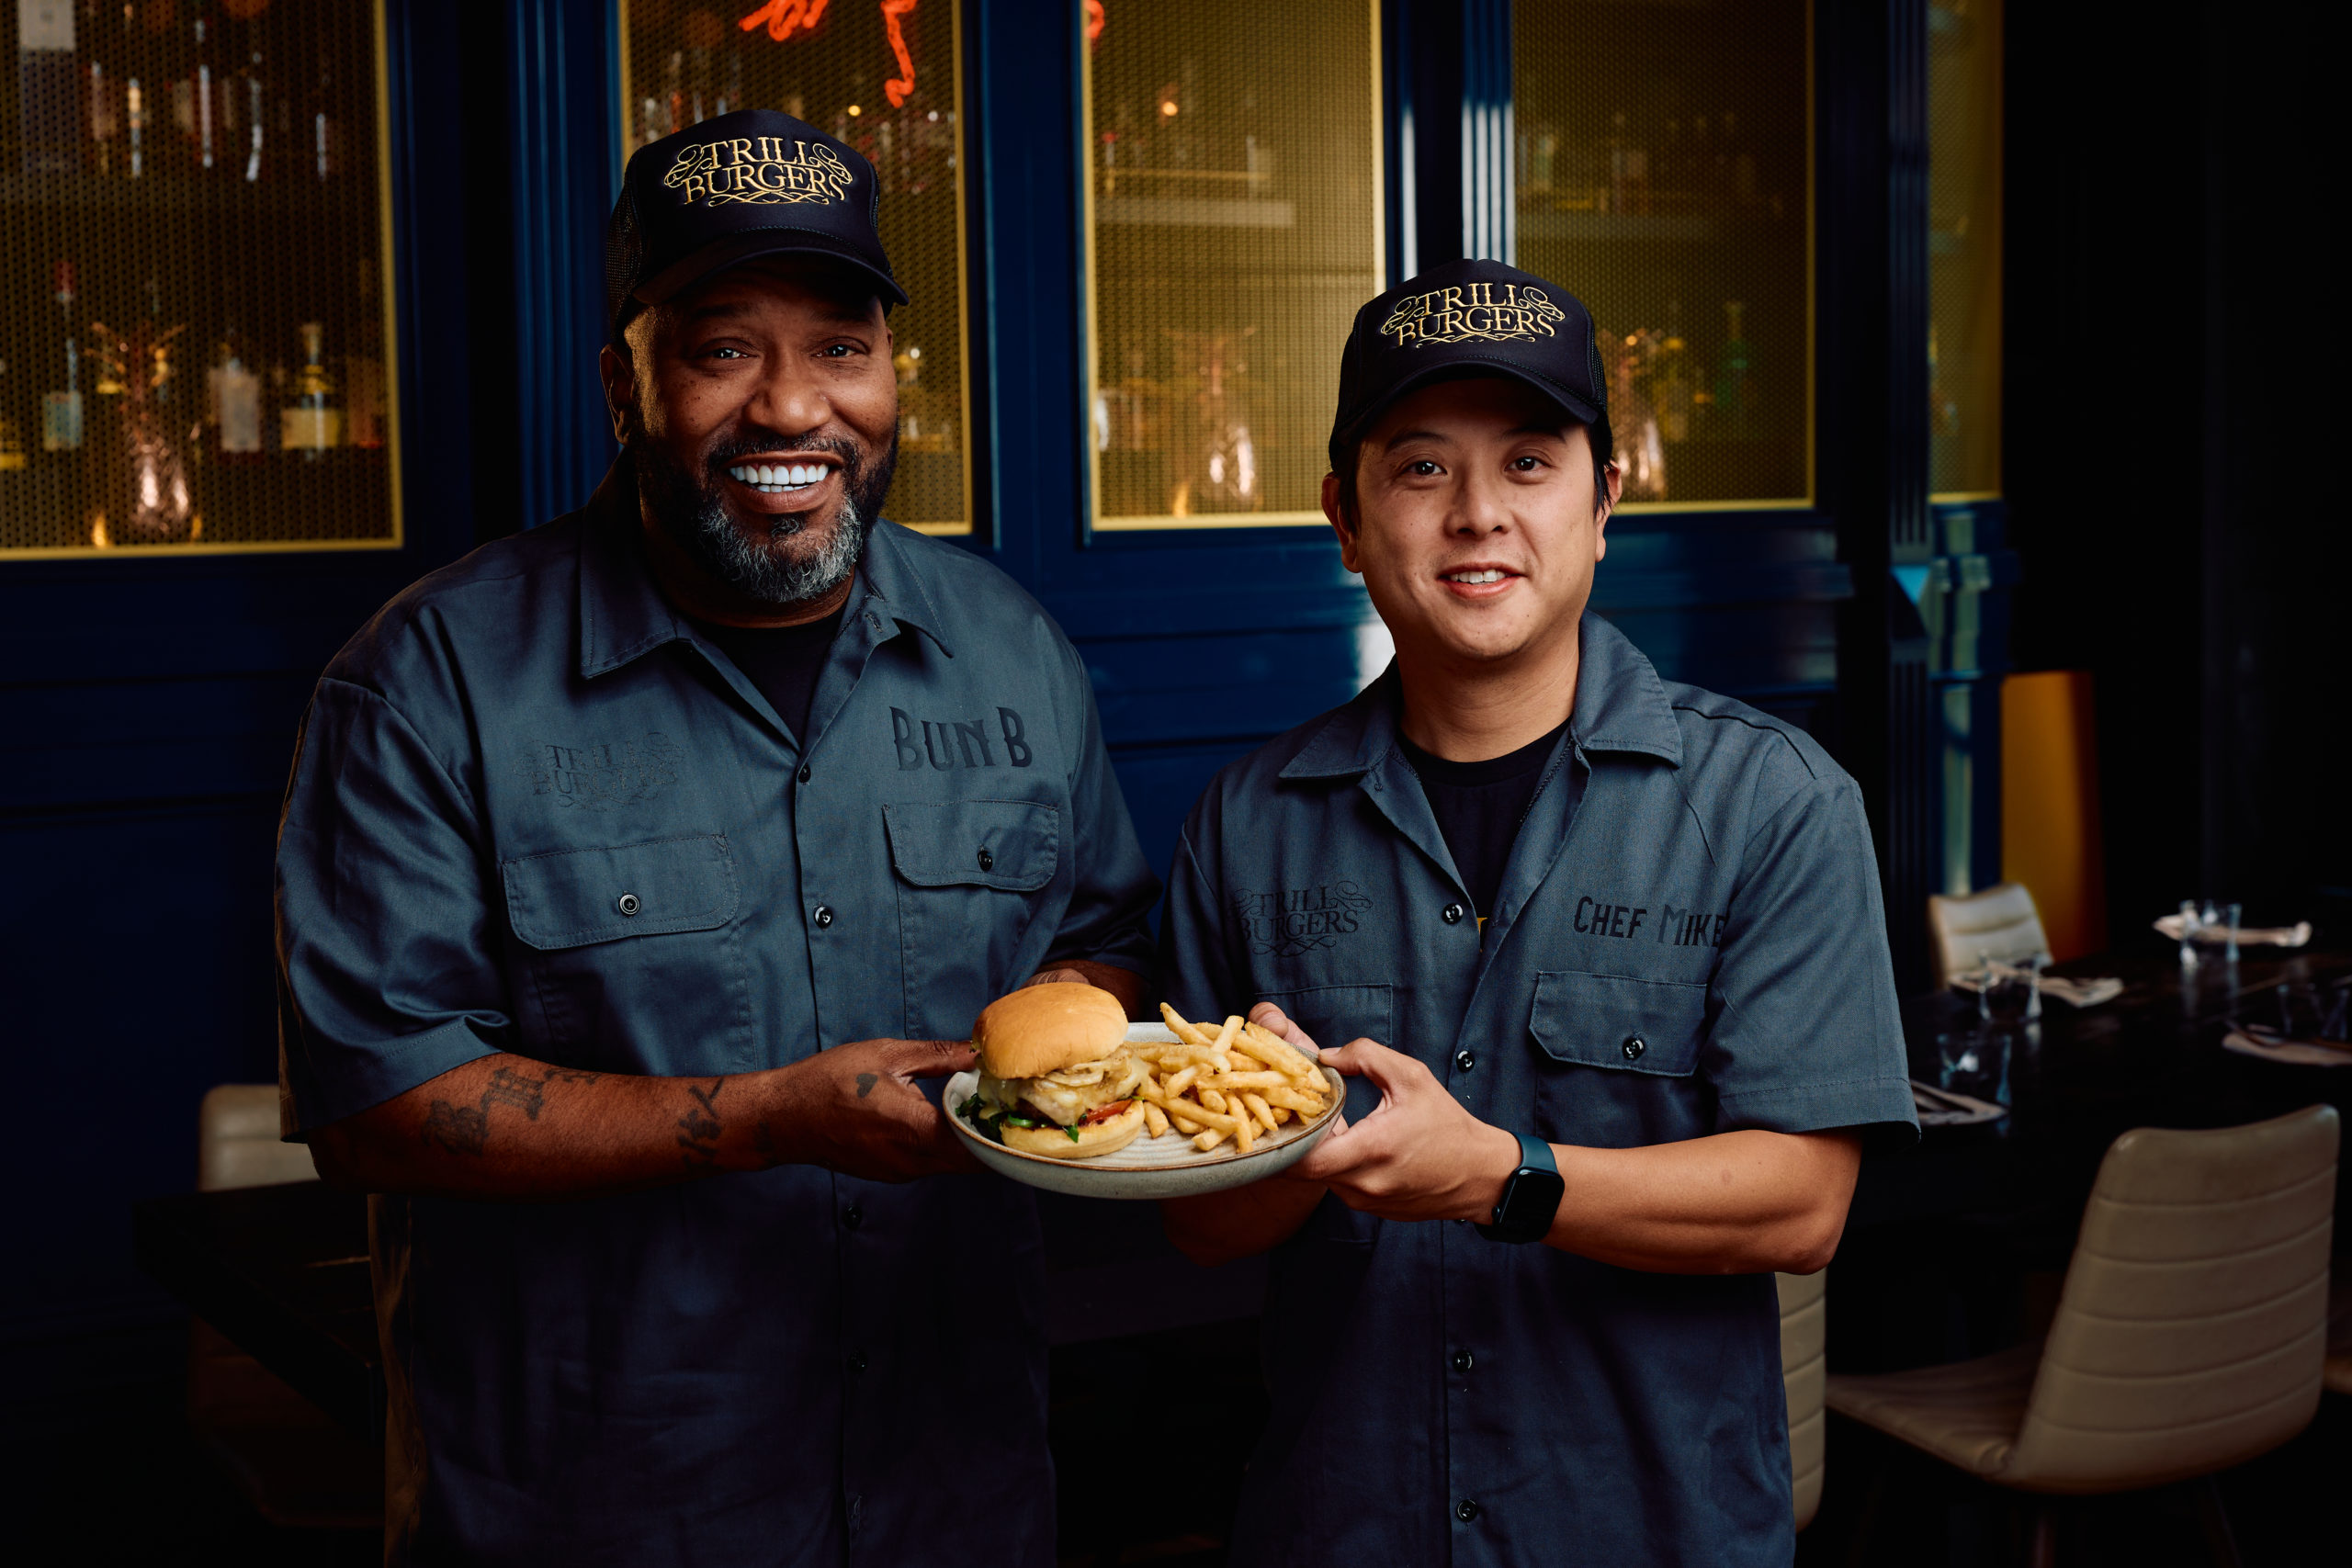 Bun B May Be New To The Restaurant Industry, But He's Already Sure Trill Burgers Will 'Be Here For Generations To Come'